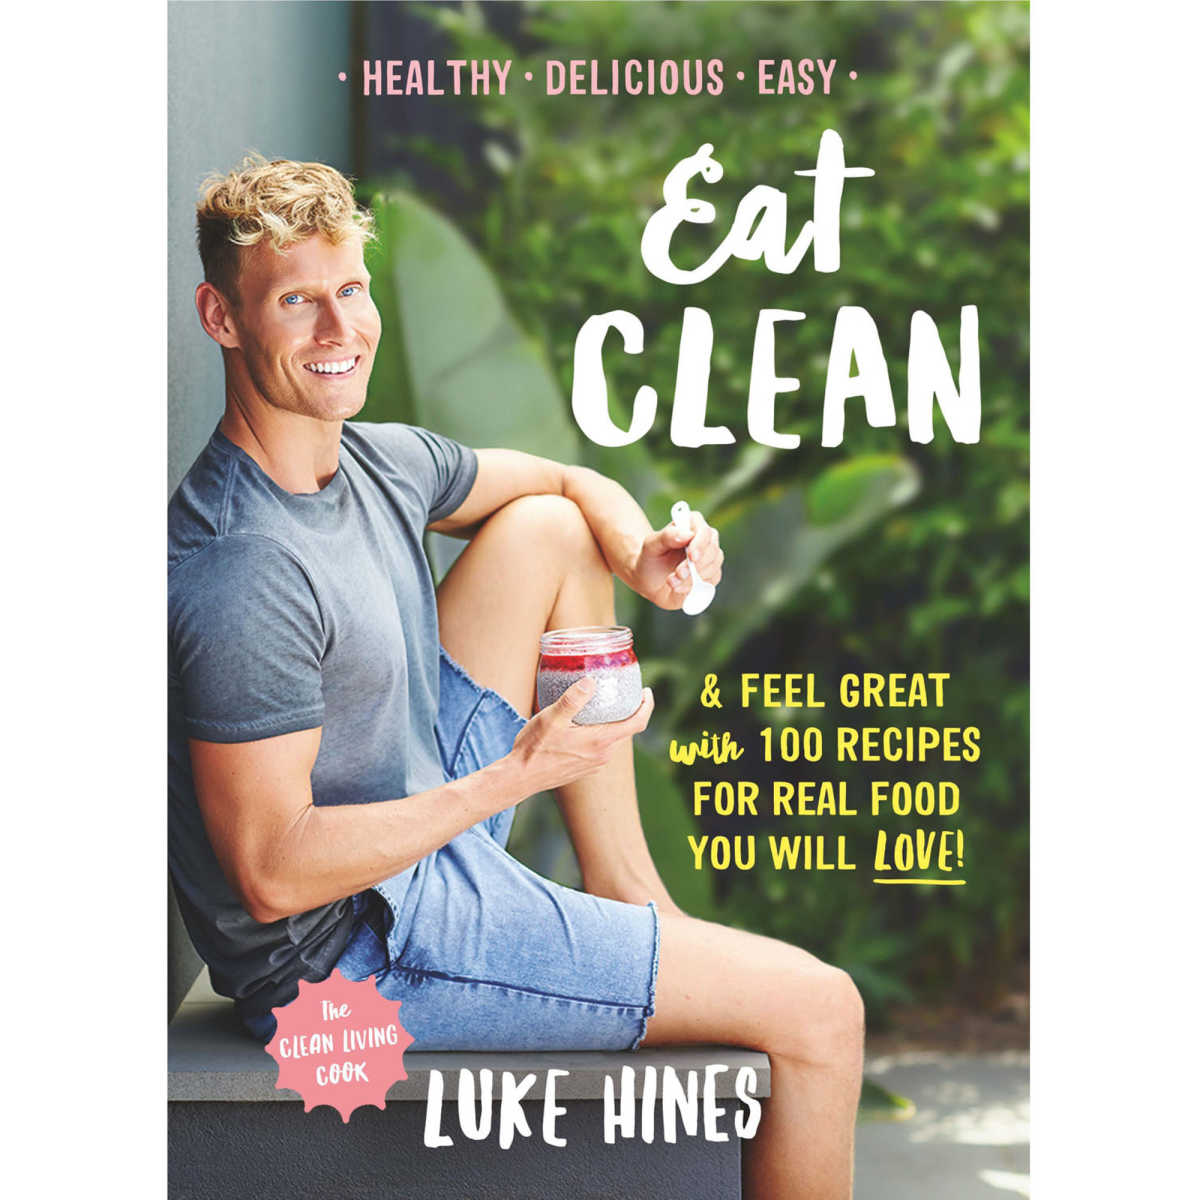 Clean Eating with Luke Hines